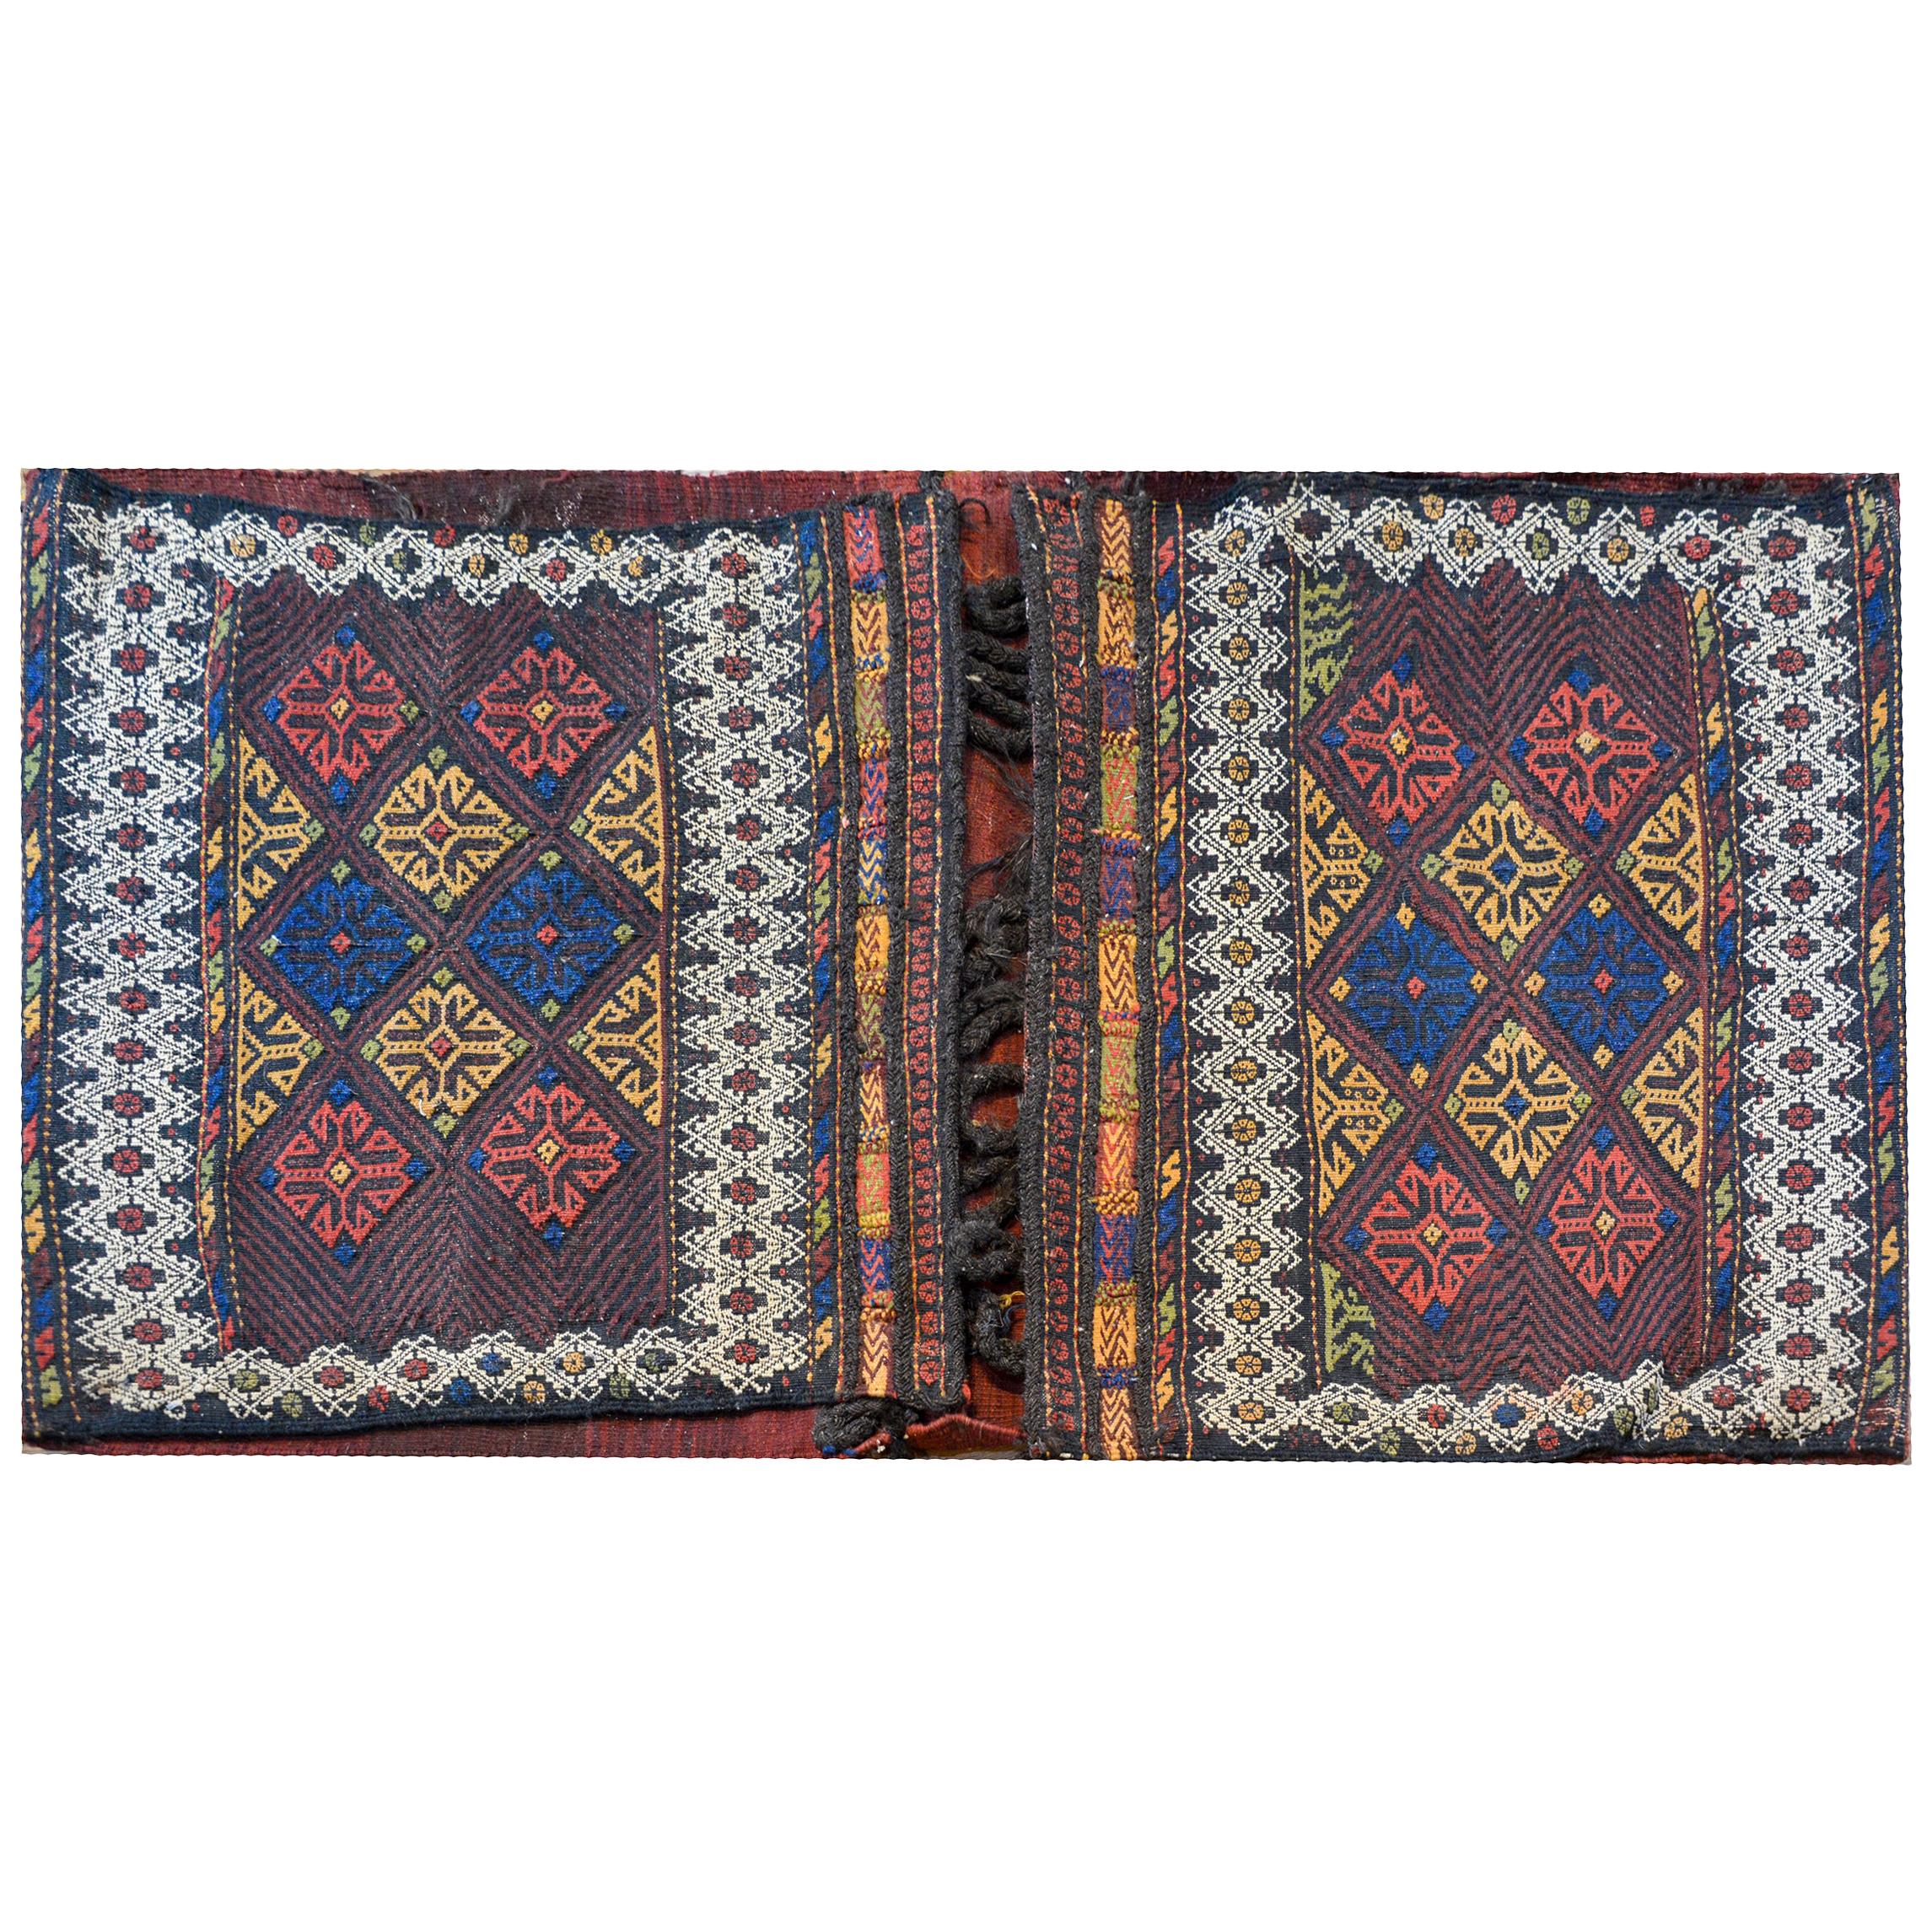 Early 20th Century Shahsevan Saddle Bag For Sale